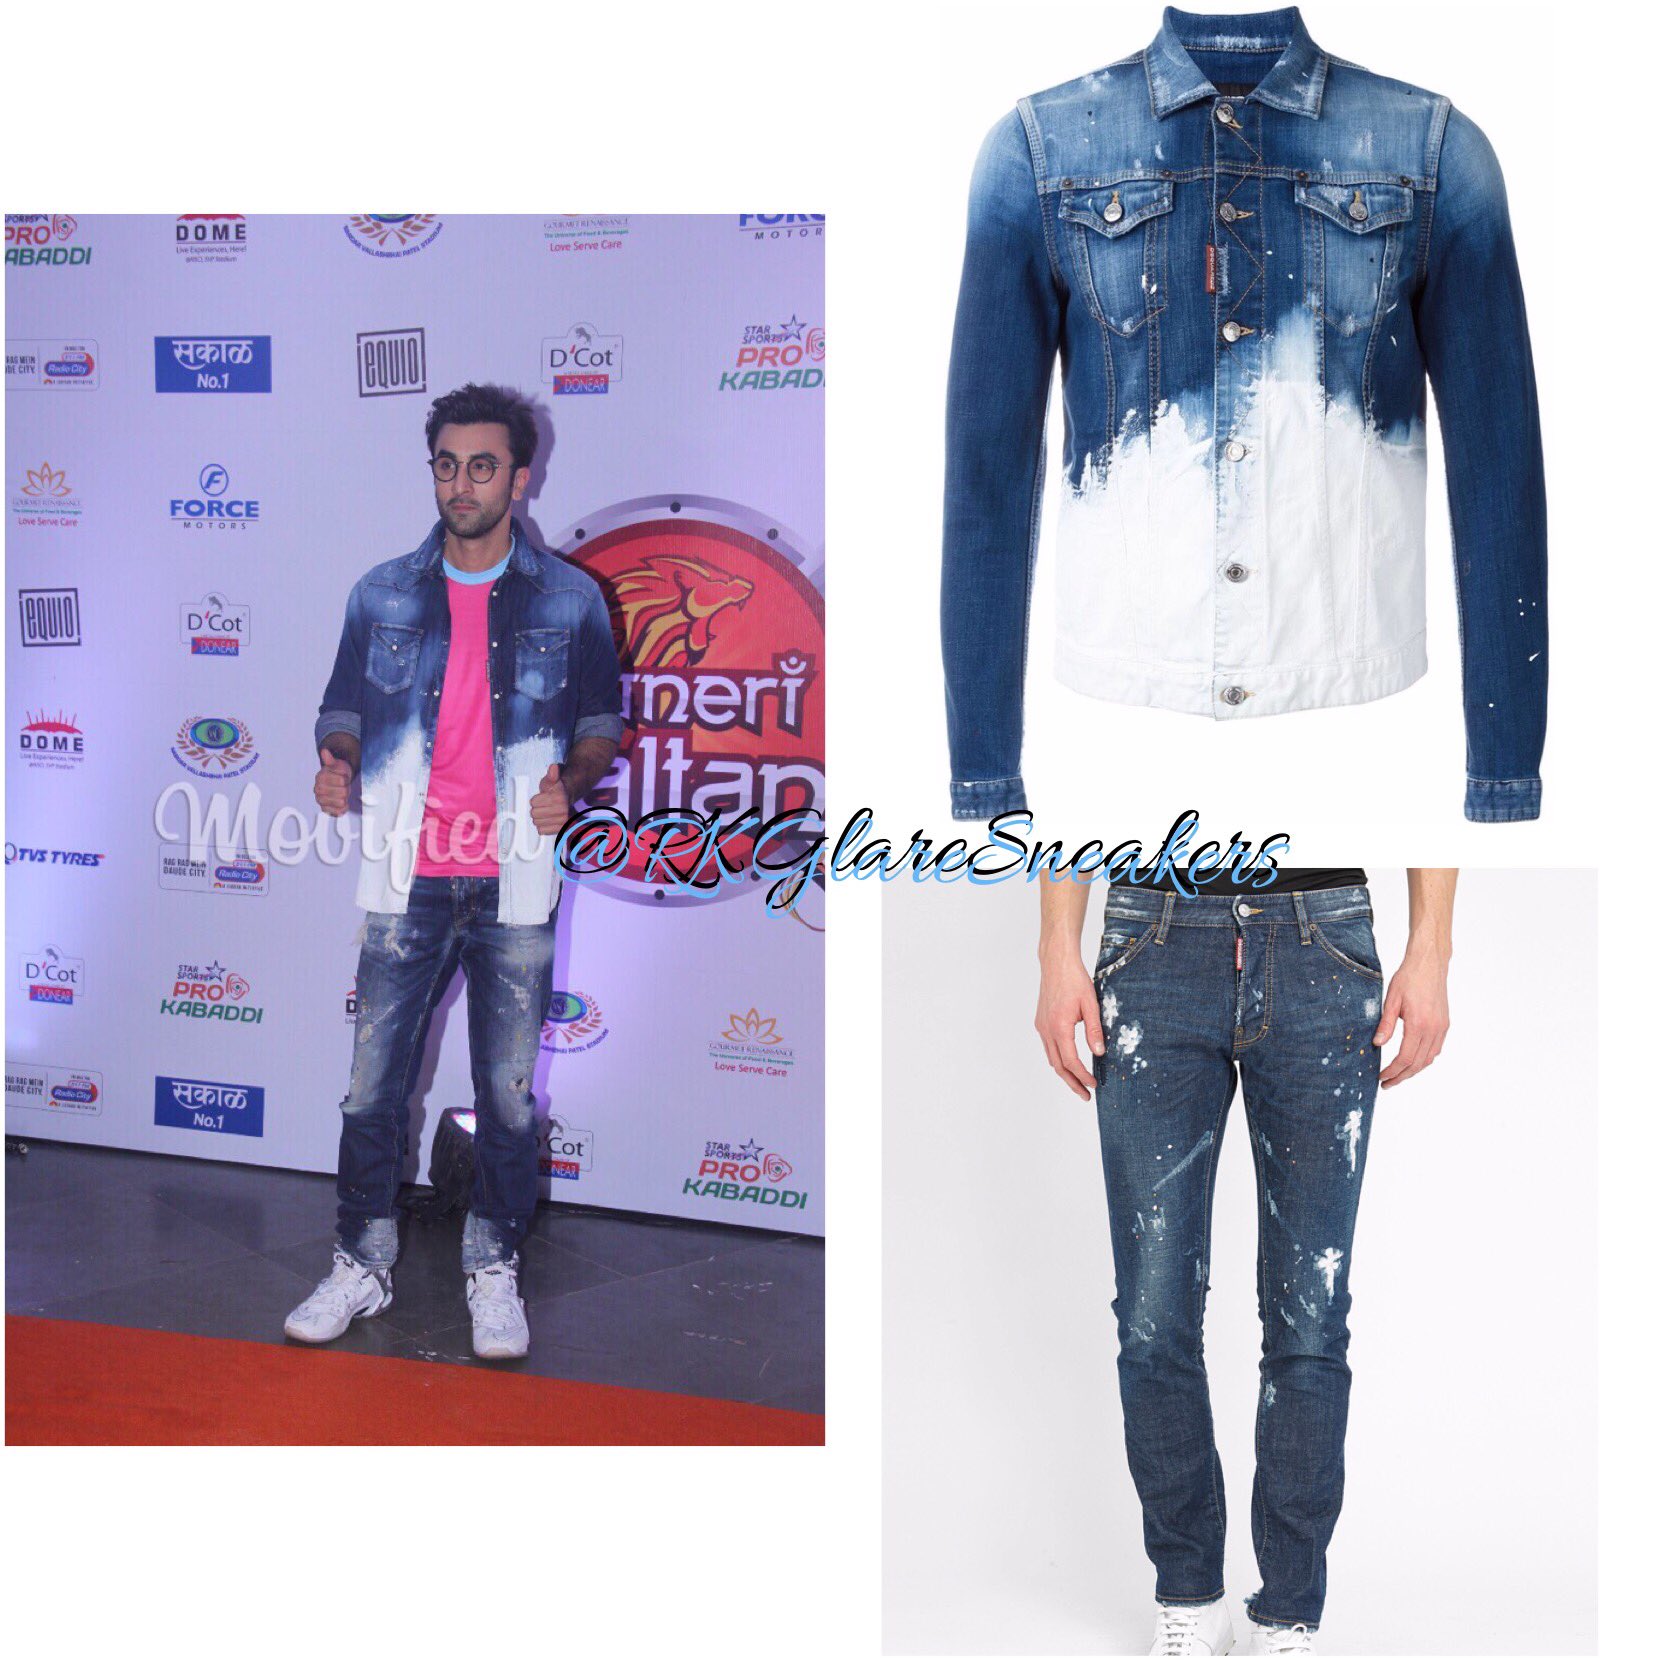 Ranbir Kapoor Steals The Hearts Of Fans In A Trendy Denim Jacket | Ranbir  Kapoor Steals The Hearts Of Fans In A Trendy Denim Jacket. #Watch # ranbirkapoor #bollywood #trending #viral | By